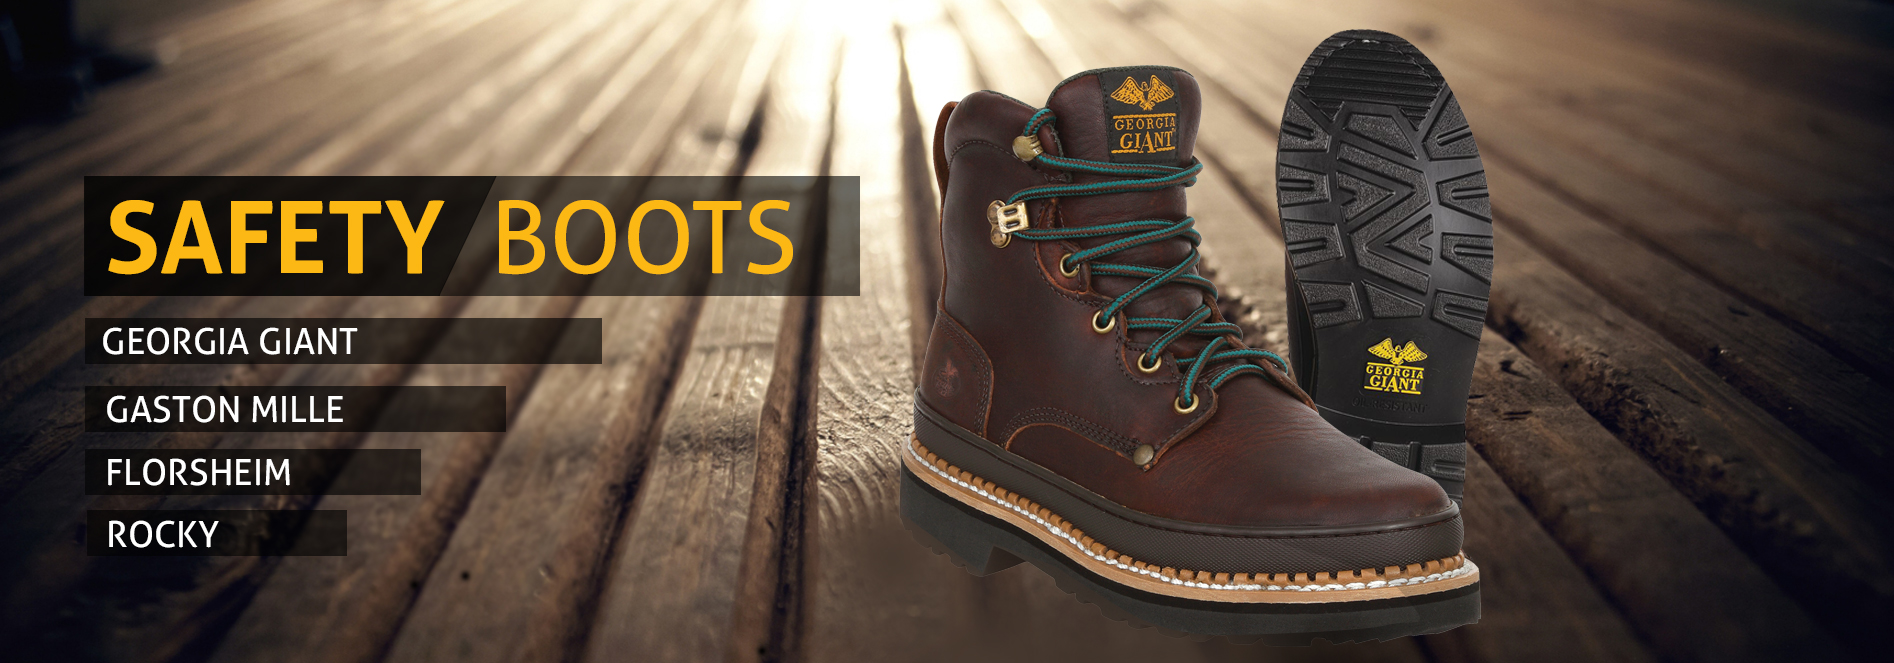 SAFETY BOOTS | FOOT PROTECTION | Al Asayel Health & Safety